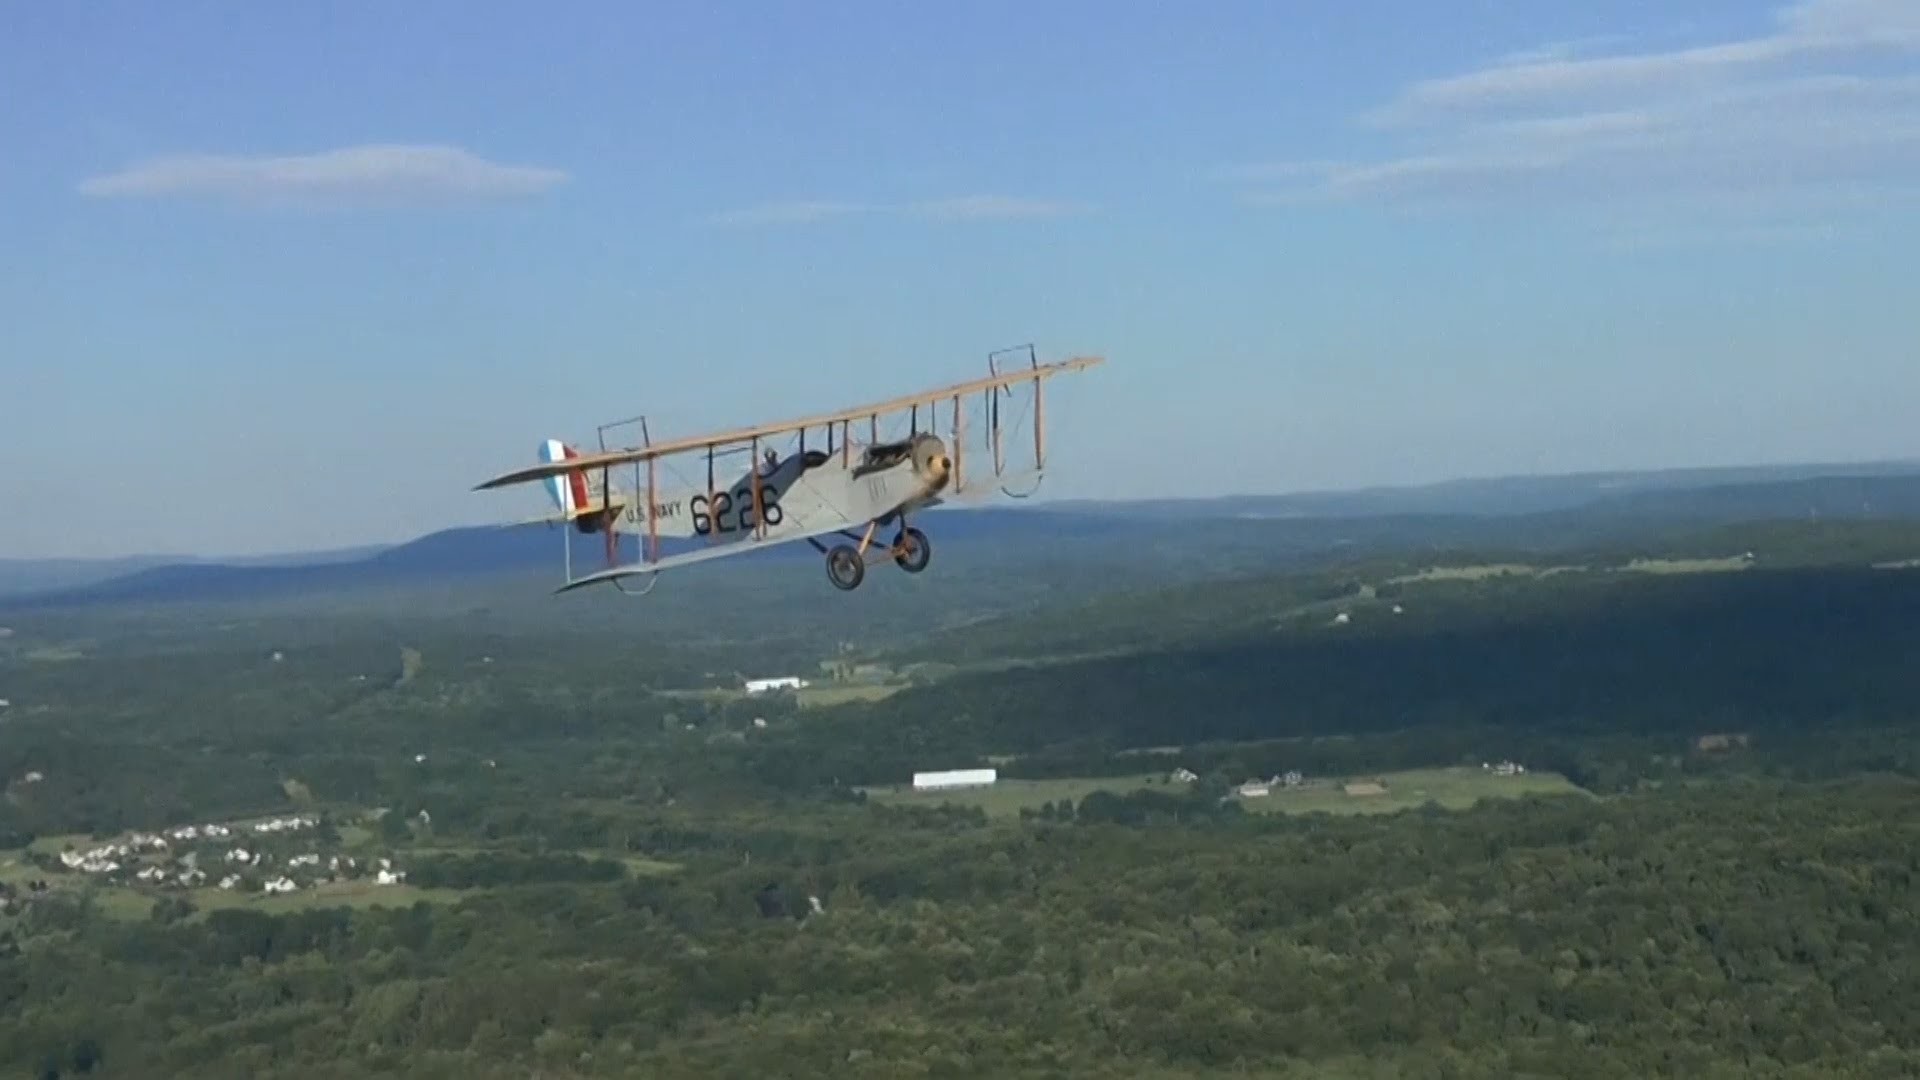 1920x1080 World War One biplanes dogfight in the skies above New York